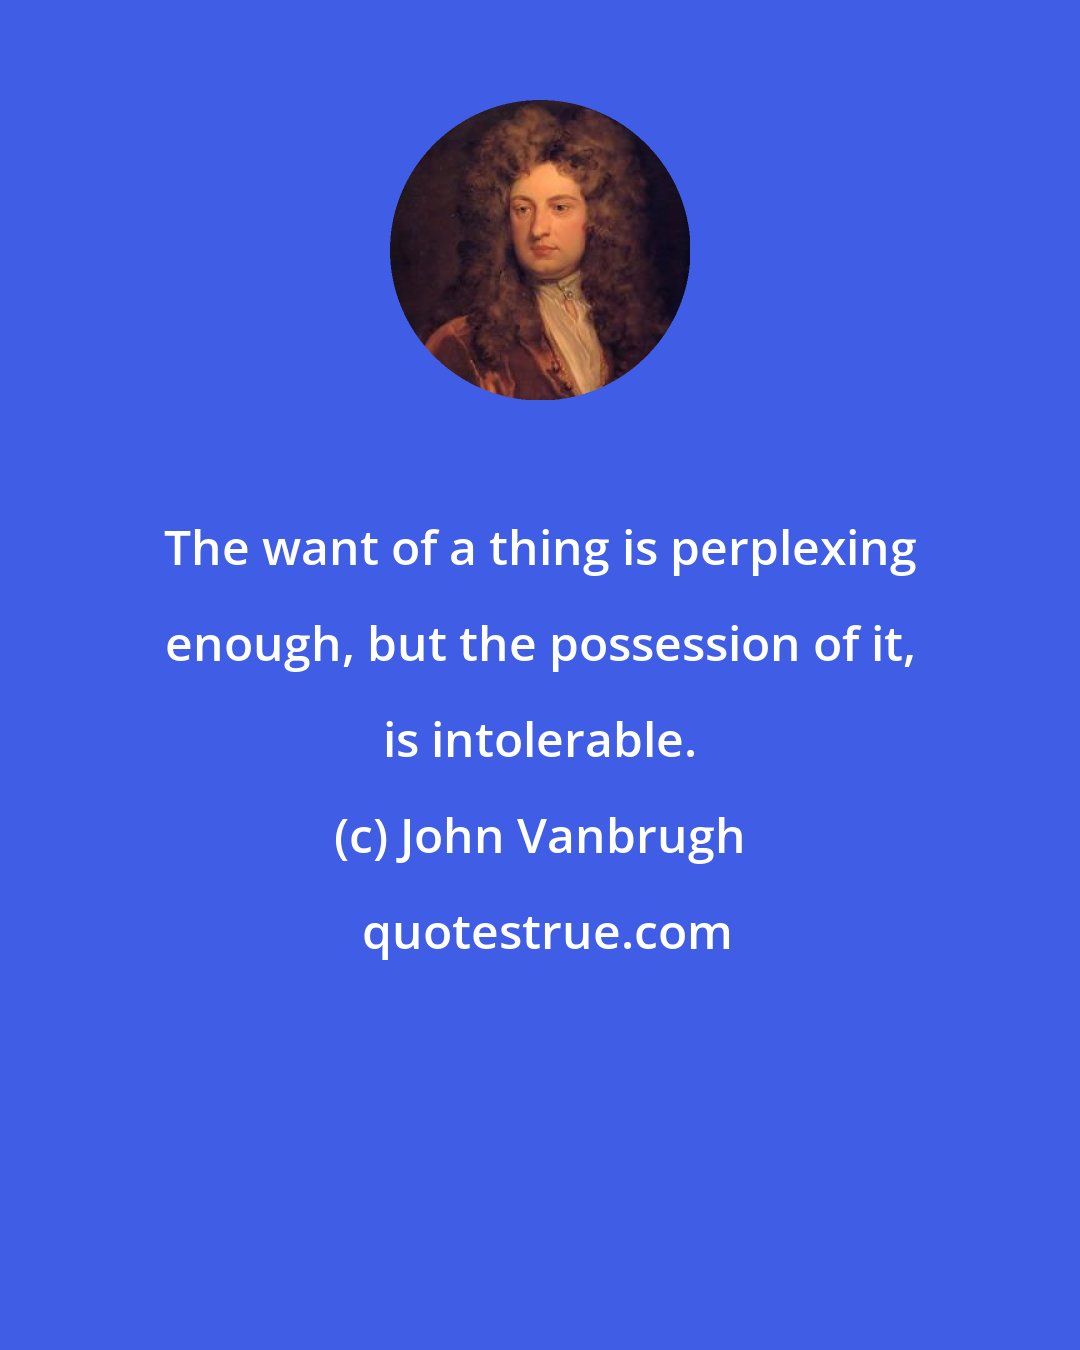 John Vanbrugh: The want of a thing is perplexing enough, but the possession of it, is intolerable.